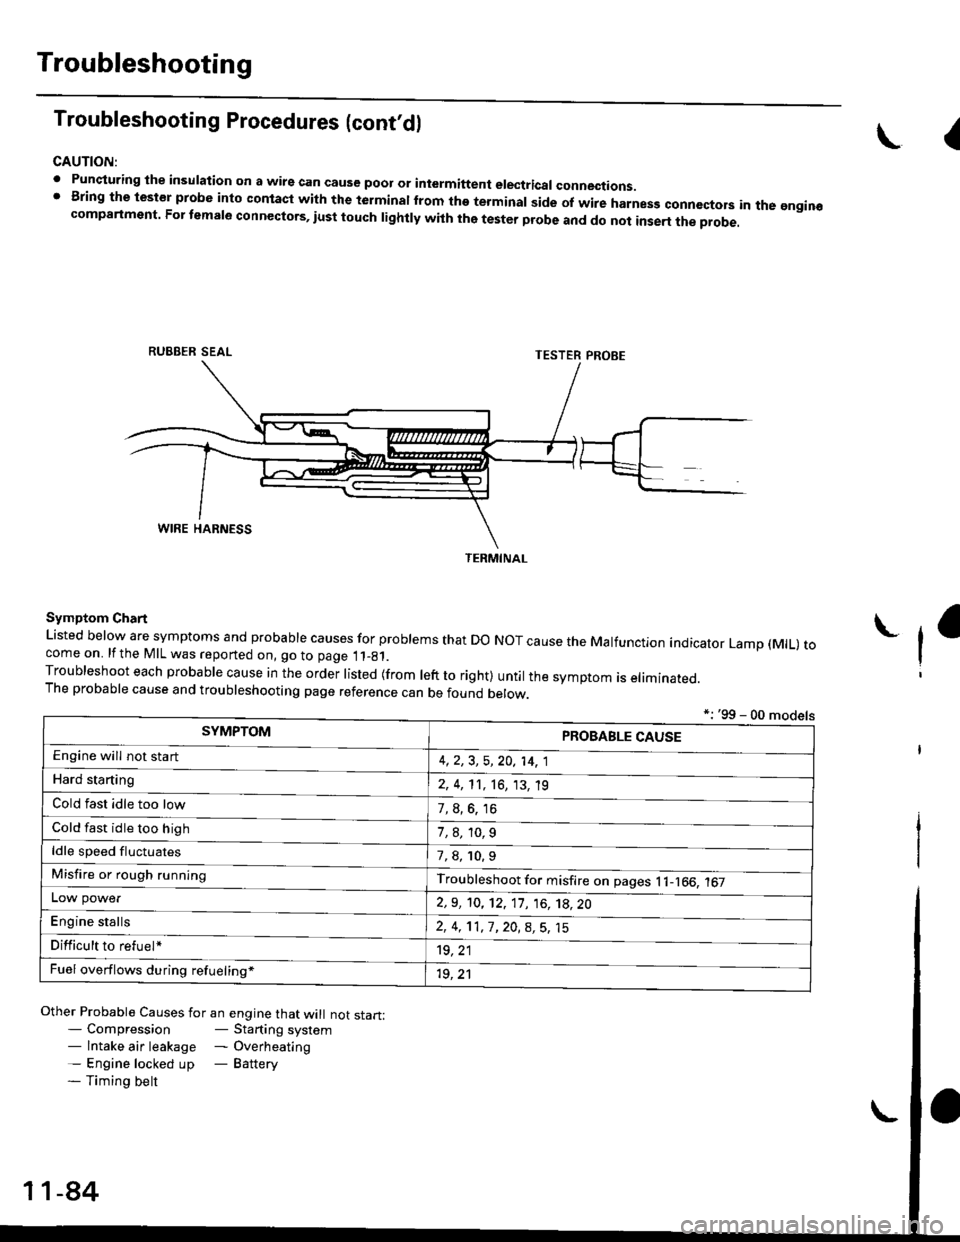 HONDA CIVIC 1999 6.G Workshop Manual Troubleshooting
Troubleshooting Procedures (cont,dl
CAUTION:
. Punqturing ihe insulation on a wirs can cause poor or intermiftent electricar connections.I Bring the test€r probe into contacl with th